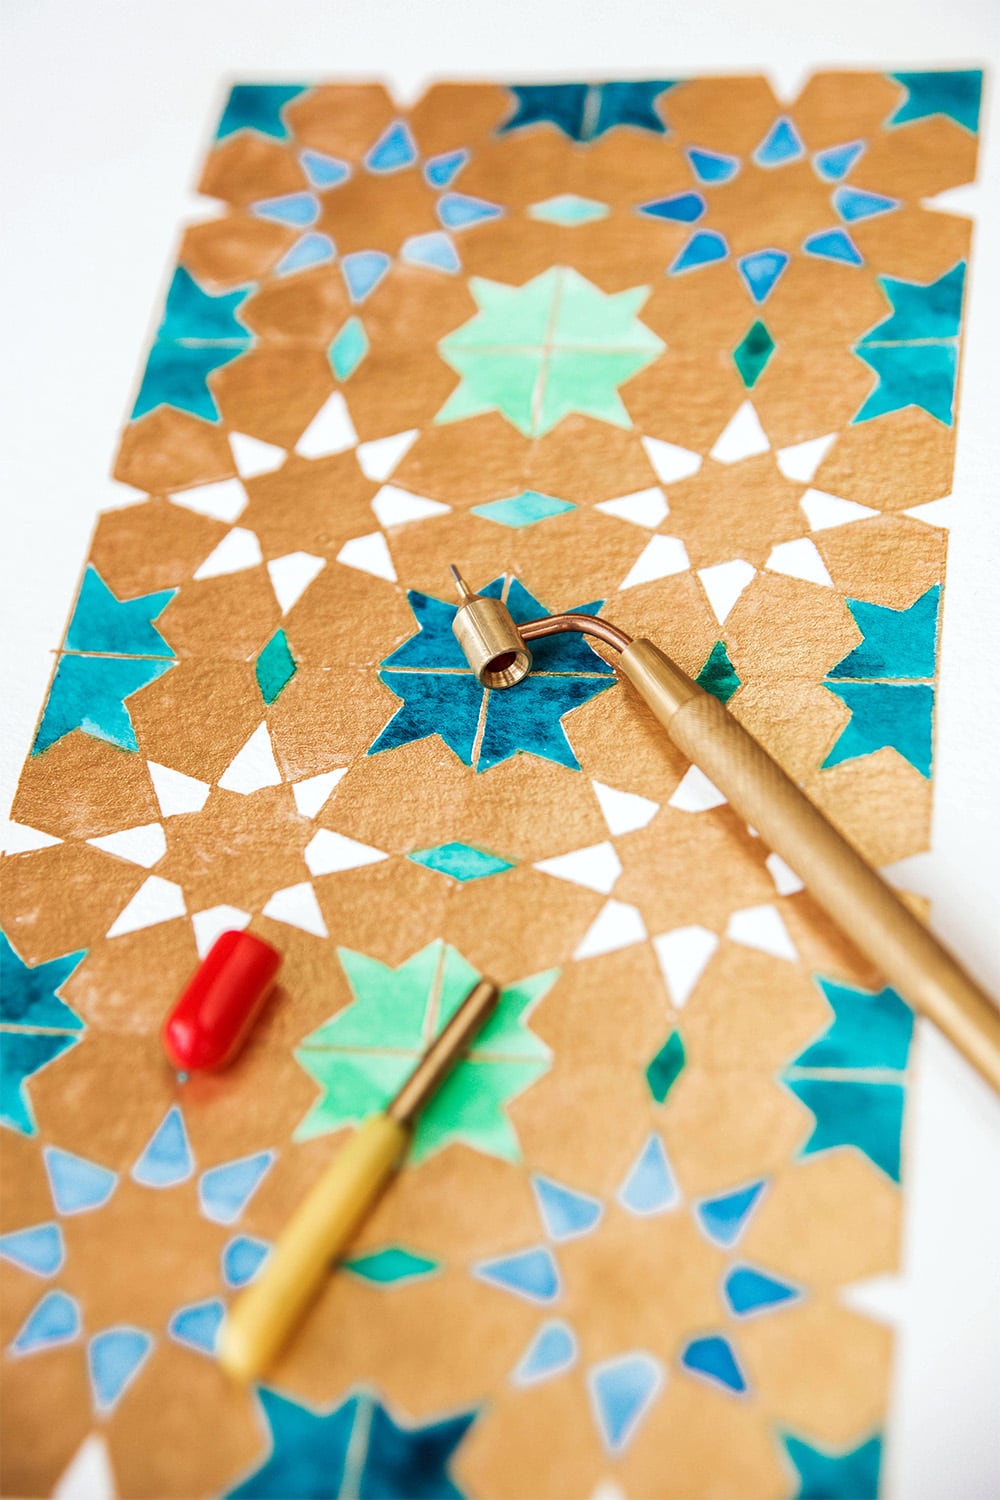 Eastern Geometric Drawing & Painting | Zahra Ammar | Crafter's Box